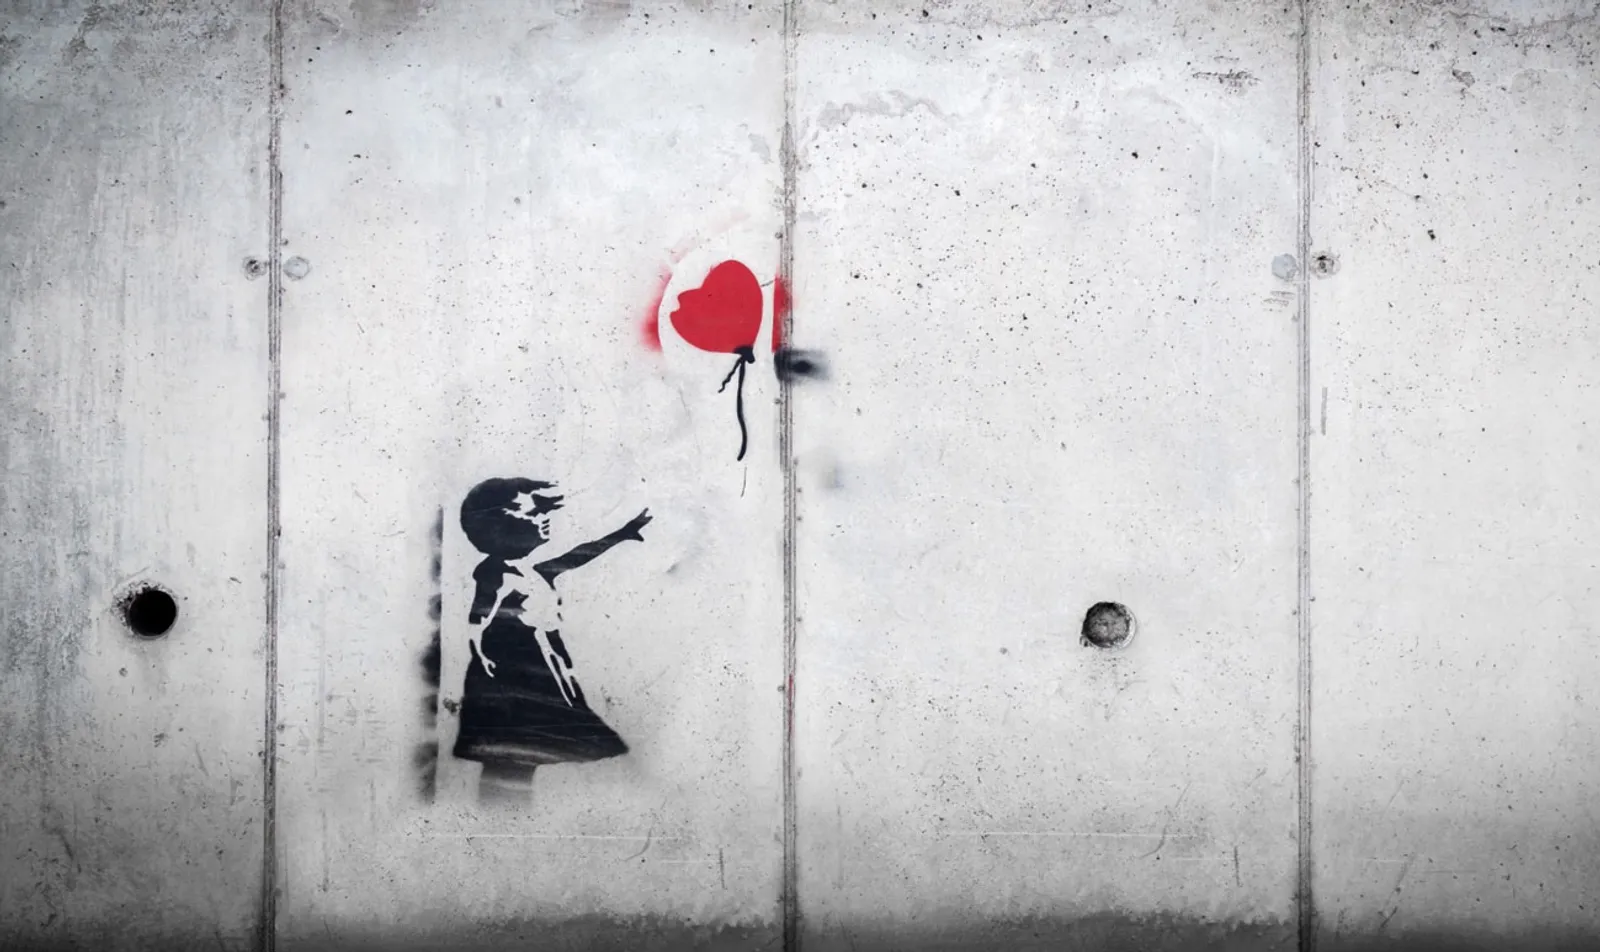 Gray wall with a silhouette of a girl losing a red balloon